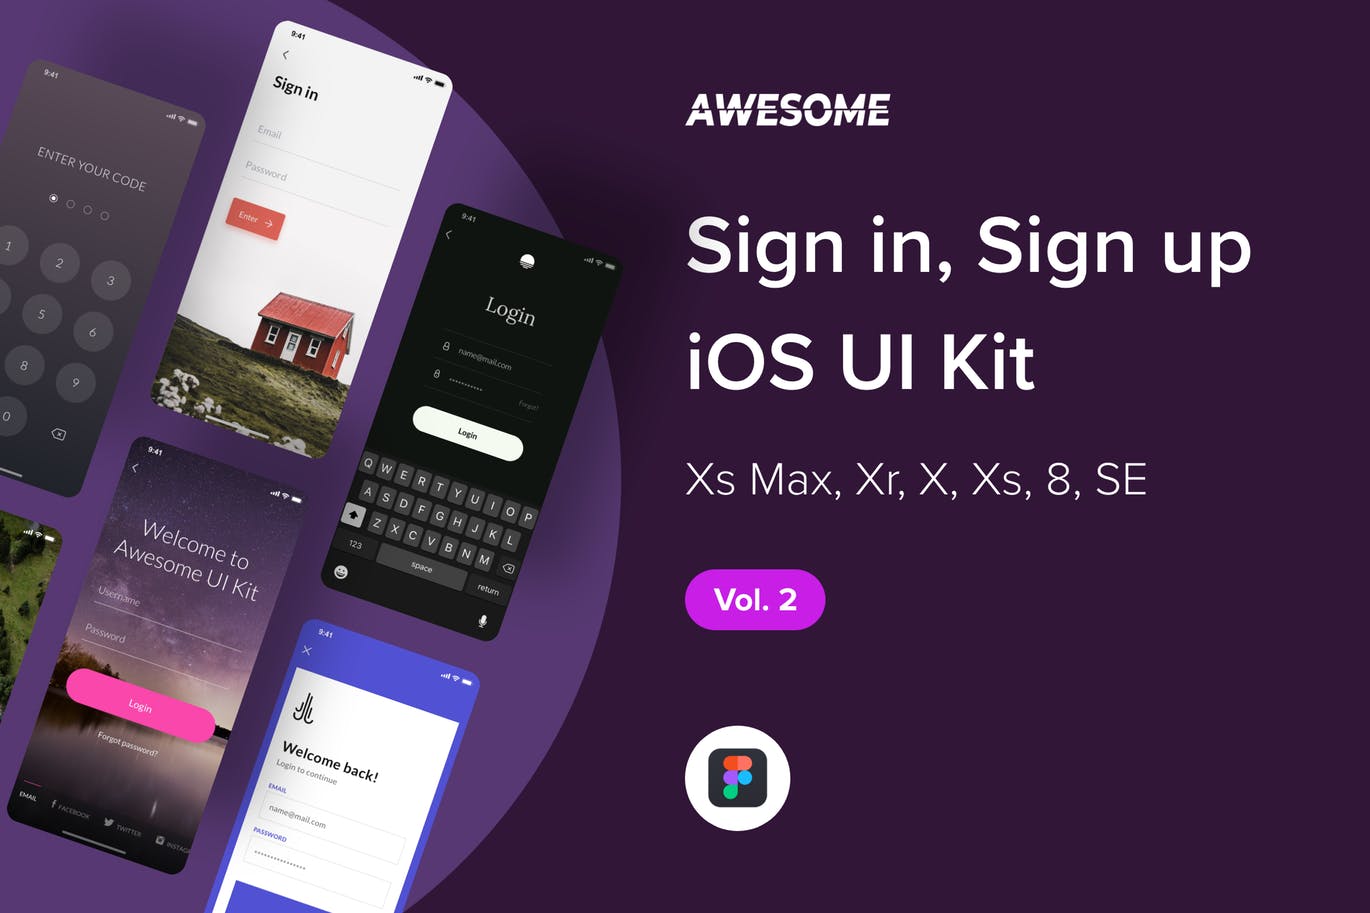 iOS手机应用注册登录界面设计UI套件v2 Awesome iOS UI Kit – Sign in / up Vol. 2 (Figma)插图